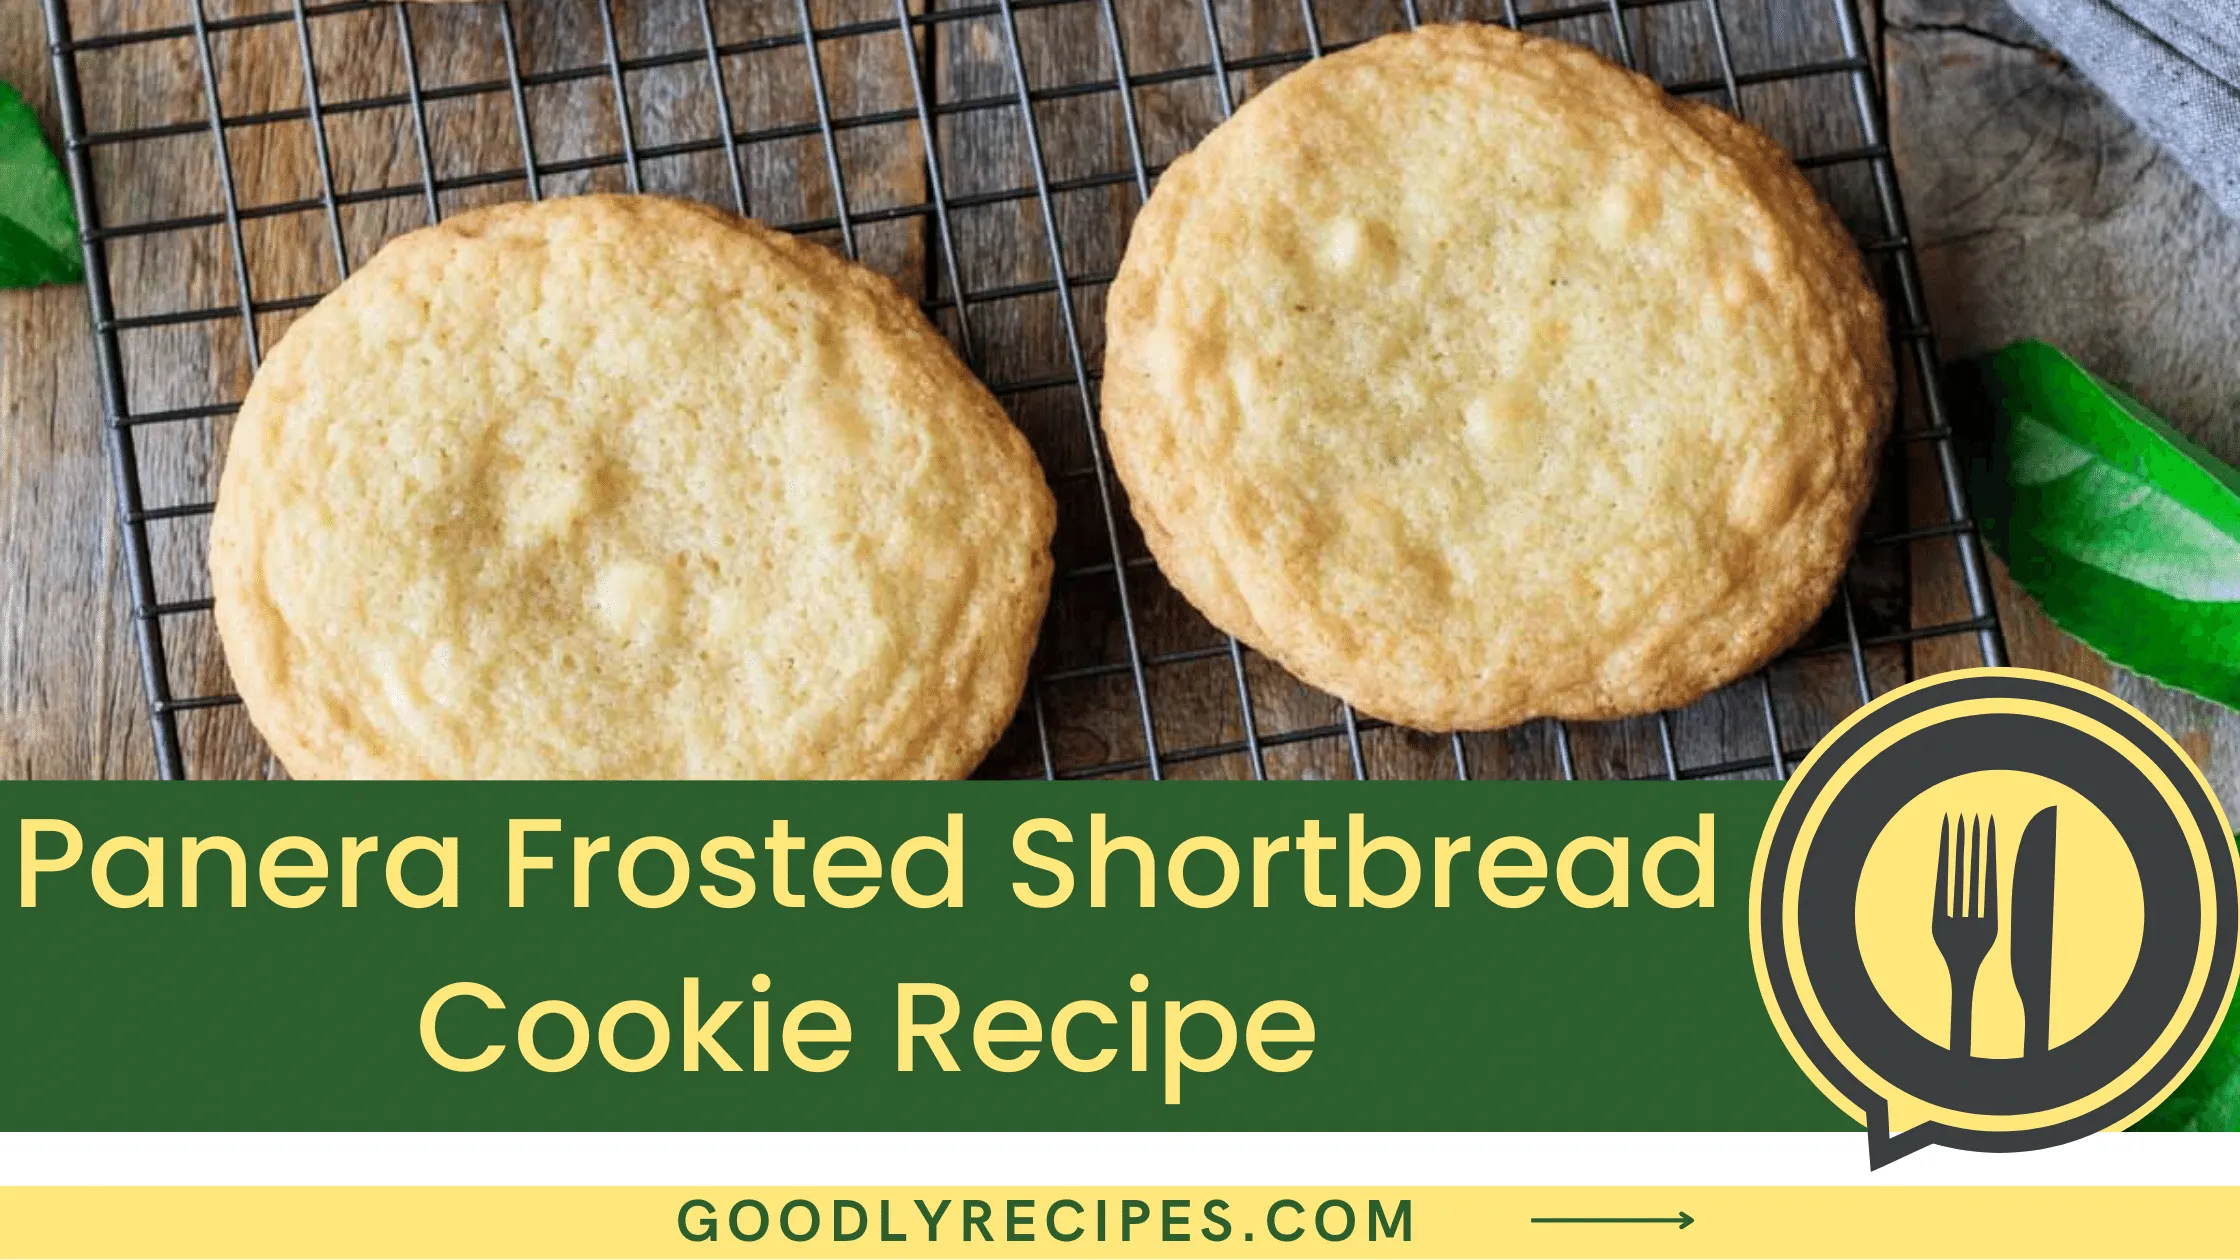 Panera Frosted Shortbread Cookie Recipe - For Food Lovers